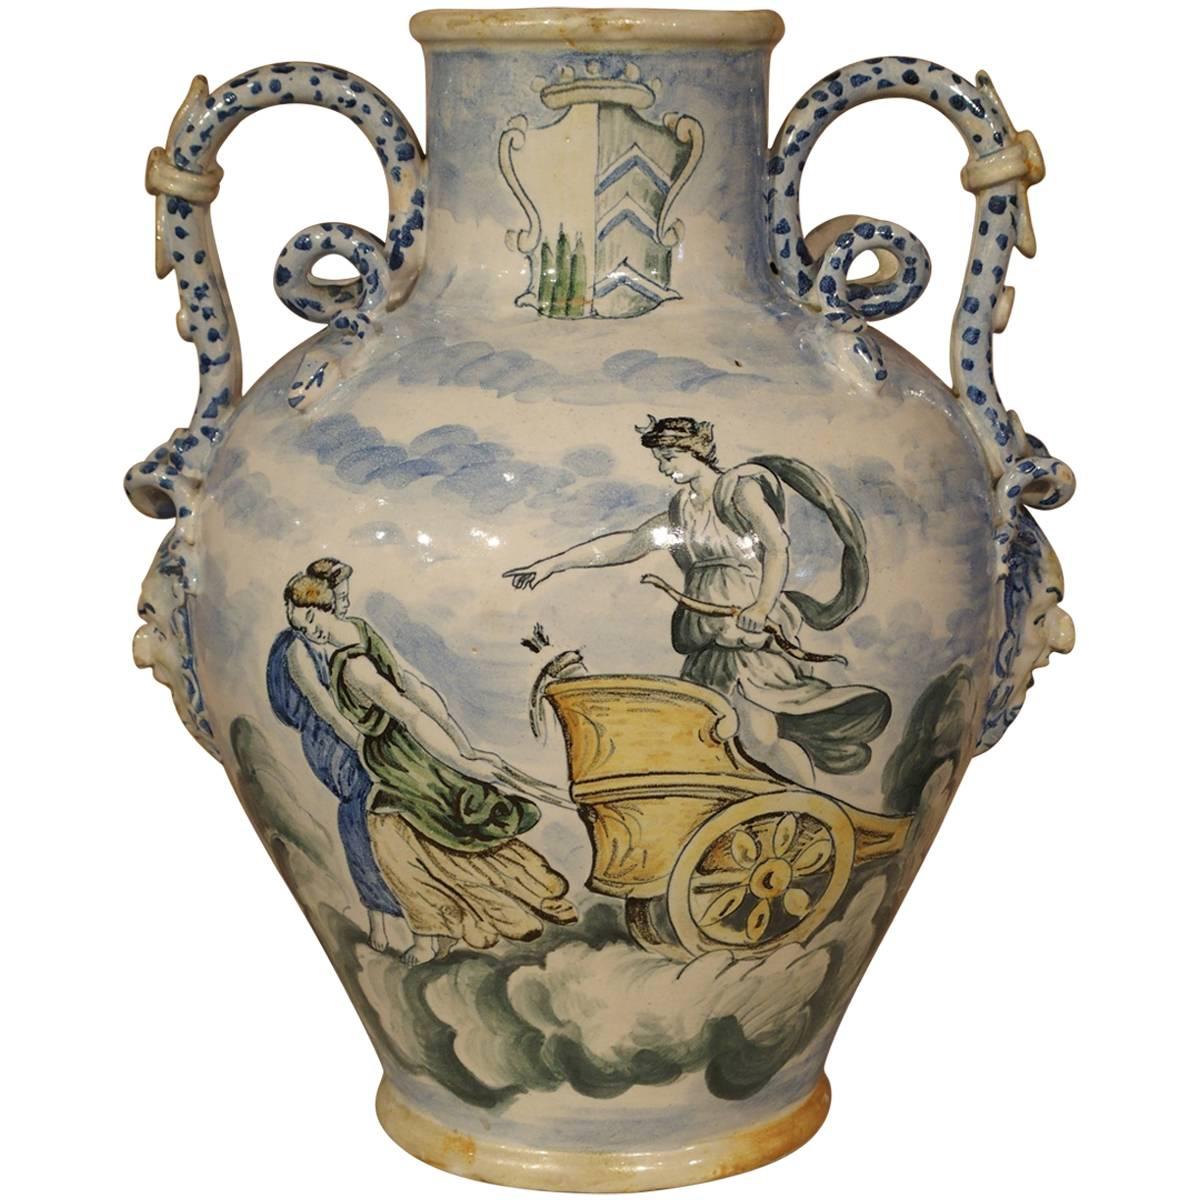 Antique Majolica Urn from Italy, 19th Century